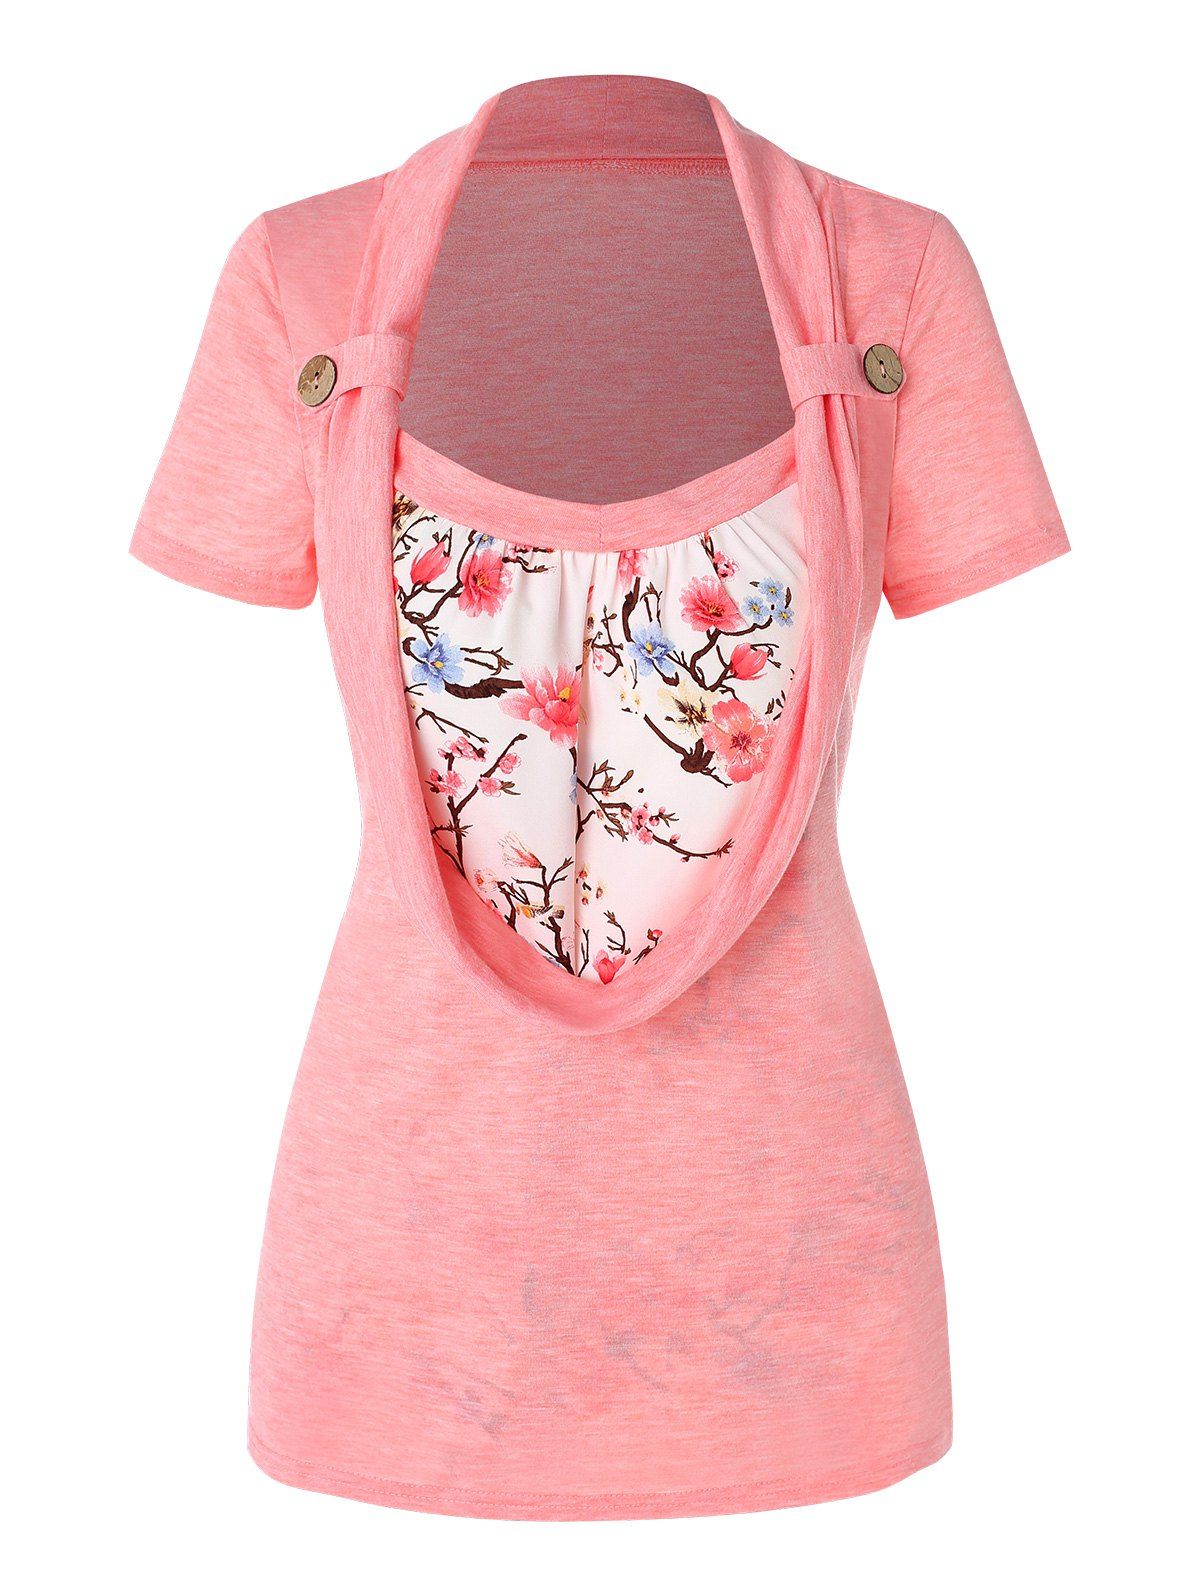 Floral Print Cowl Front Faux Twinset Tee - LIGHT PINK L